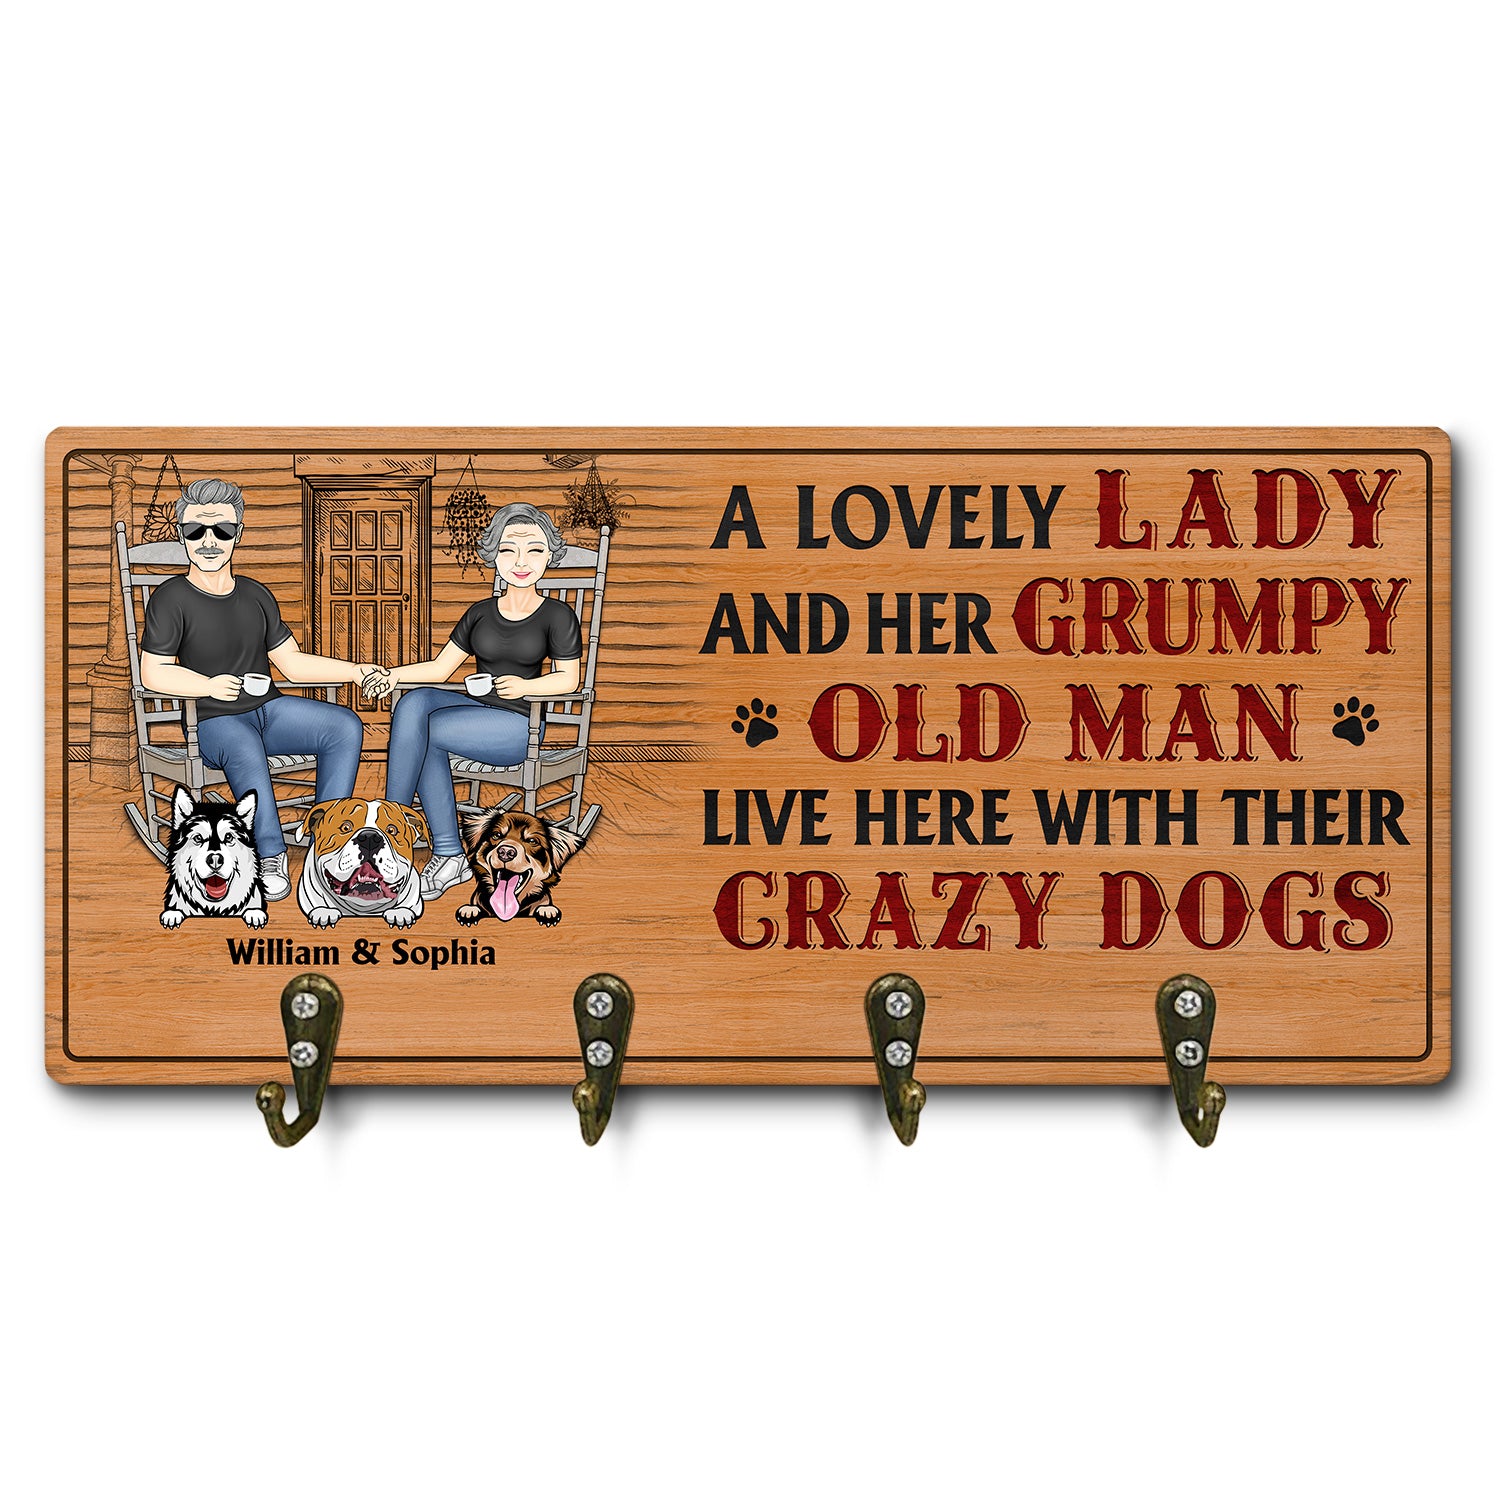 A Lovely Lady And A Grumpy Old Man Live Here With Their Crazy Dogs - Outdoor, Home Decor Gift For Family, Couple, Pet Lovers - Personalized Custom Wood Key Holder